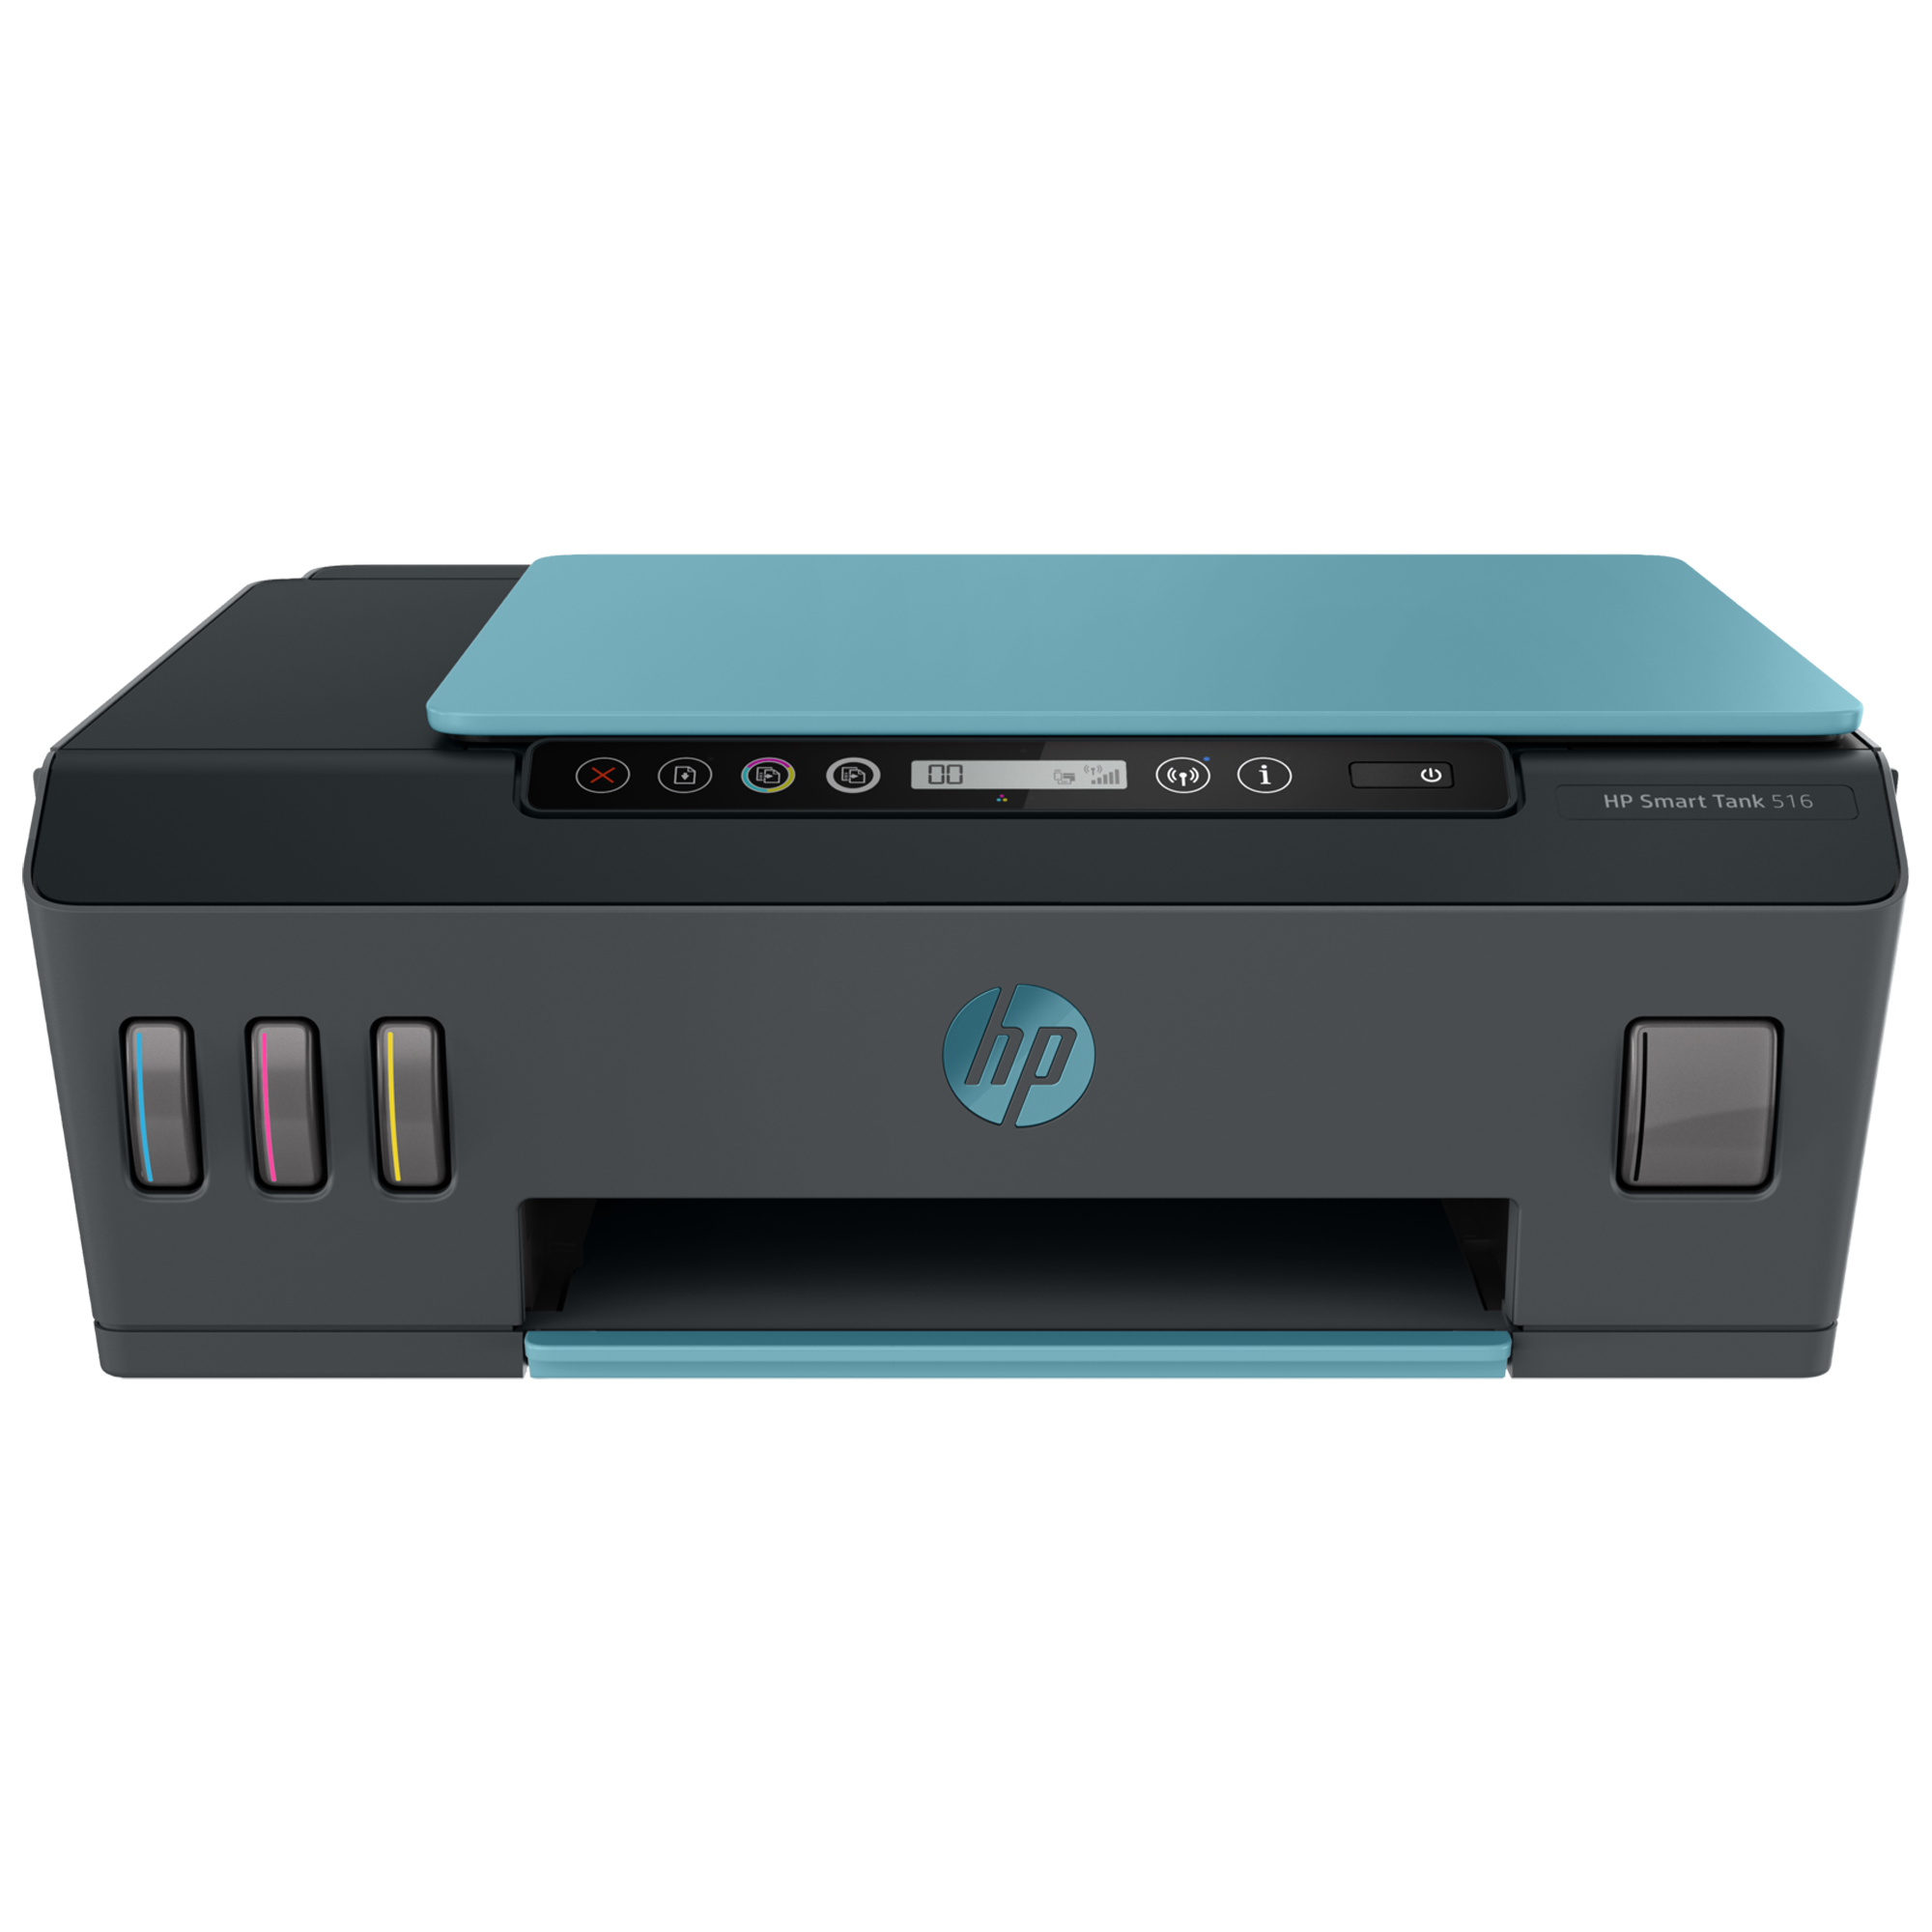 HP Smart Tank 516 Wireless Color All-in-One Inkjet Printer (Borderless Printing, 3YW70A, Cyan)_1